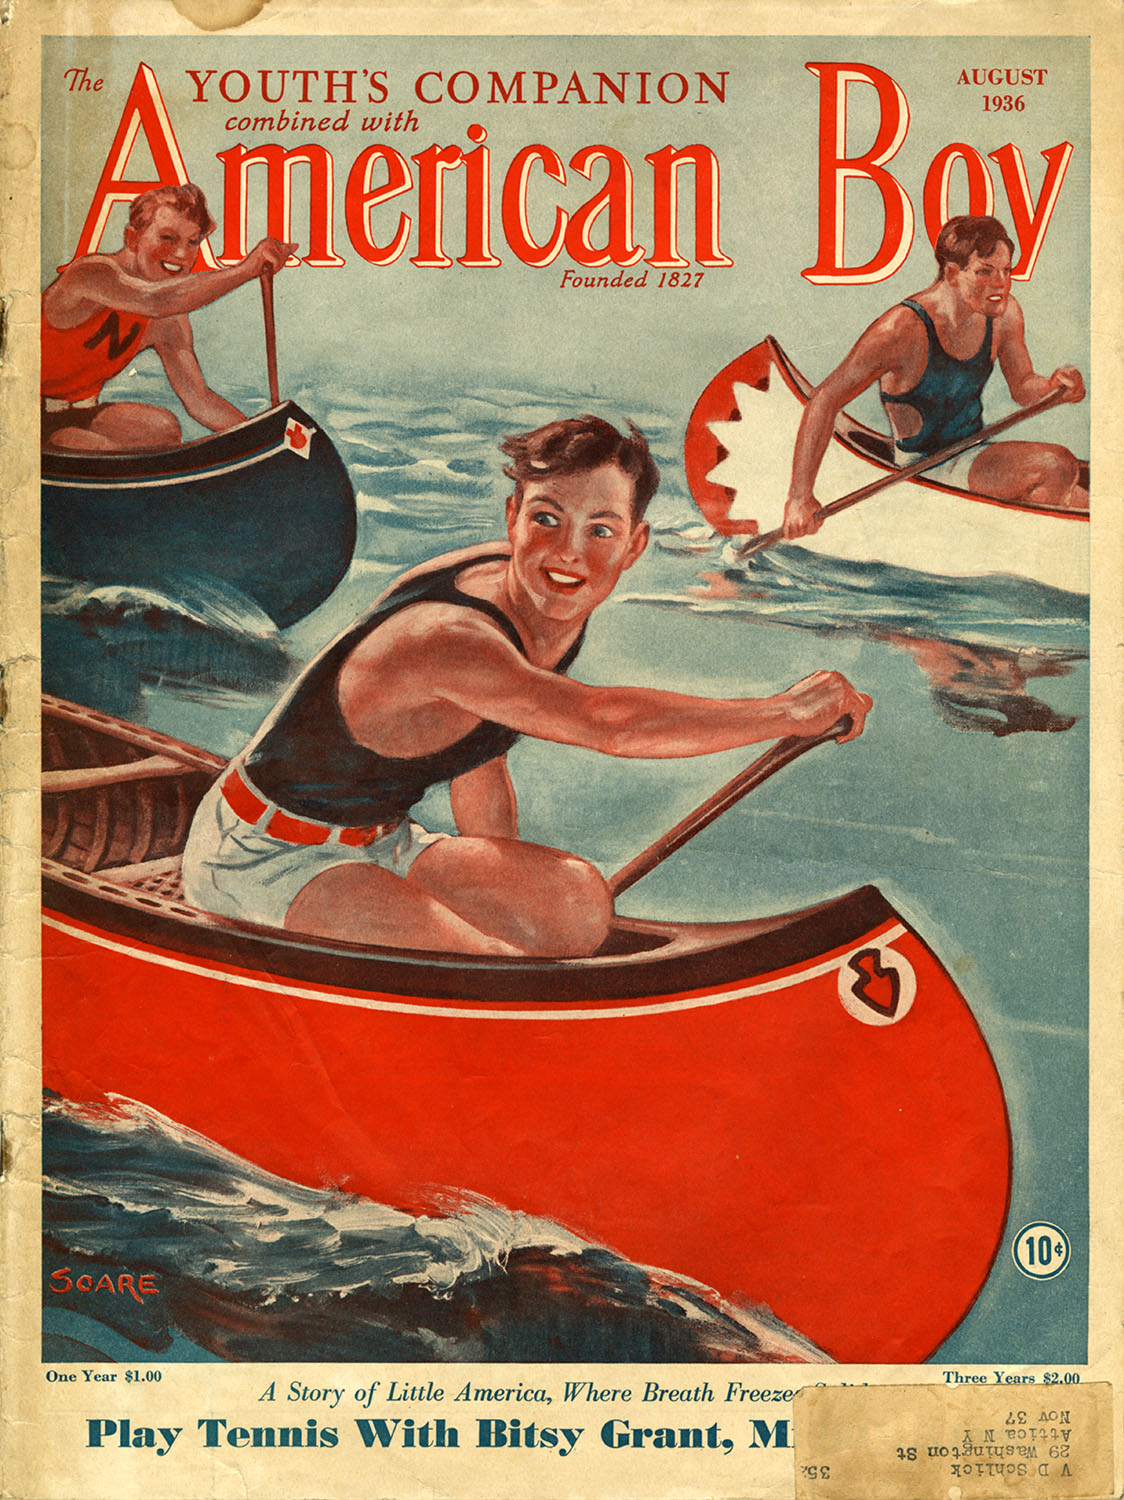 American Boy August 1936 cover